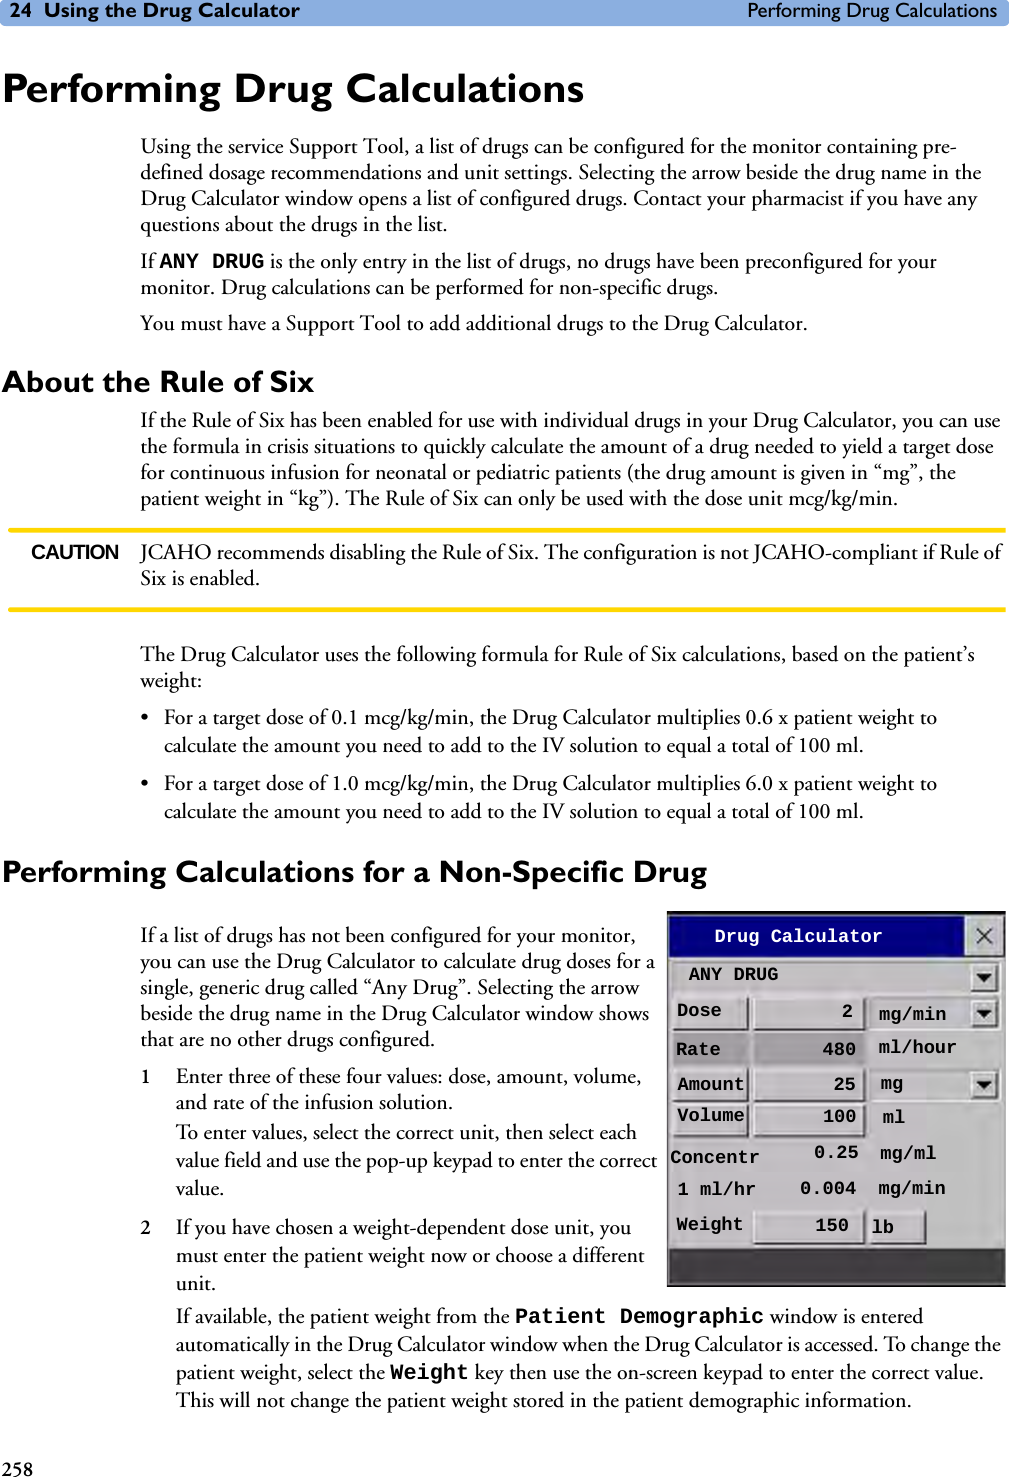 24 Using the Drug Calculator Performing Drug Calculations258Performing Drug Calculations Using the service Support Tool, a list of drugs can be configured for the monitor containing pre-defined dosage recommendations and unit settings. Selecting the arrow beside the drug name in the Drug Calculator window opens a list of configured drugs. Contact your pharmacist if you have any questions about the drugs in the list. If ANY DRUG is the only entry in the list of drugs, no drugs have been preconfigured for your monitor. Drug calculations can be performed for non-specific drugs. You must have a Support Tool to add additional drugs to the Drug Calculator.About the Rule of SixIf the Rule of Six has been enabled for use with individual drugs in your Drug Calculator, you can use the formula in crisis situations to quickly calculate the amount of a drug needed to yield a target dose for continuous infusion for neonatal or pediatric patients (the drug amount is given in “mg”, the patient weight in “kg”). The Rule of Six can only be used with the dose unit mcg/kg/min. CAUTION JCAHO recommends disabling the Rule of Six. The configuration is not JCAHO-compliant if Rule of Six is enabled.The Drug Calculator uses the following formula for Rule of Six calculations, based on the patient’s weight:• For a target dose of 0.1 mcg/kg/min, the Drug Calculator multiplies 0.6 x patient weight to calculate the amount you need to add to the IV solution to equal a total of 100 ml.• For a target dose of 1.0 mcg/kg/min, the Drug Calculator multiplies 6.0 x patient weight to calculate the amount you need to add to the IV solution to equal a total of 100 ml.Performing Calculations for a Non-Specific Drug If a list of drugs has not been configured for your monitor, you can use the Drug Calculator to calculate drug doses for a single, generic drug called “Any Drug”. Selecting the arrow beside the drug name in the Drug Calculator window shows that are no other drugs configured. 1Enter three of these four values: dose, amount, volume, and rate of the infusion solution. To enter values, select the correct unit, then select each value field and use the pop-up keypad to enter the correct value. 2If you have chosen a weight-dependent dose unit, you must enter the patient weight now or choose a different unit. If available, the patient weight from the Patient Demographic window is entered automatically in the Drug Calculator window when the Drug Calculator is accessed. To change the patient weight, select the Weight key then use the on-screen keypad to enter the correct value. This will not change the patient weight stored in the patient demographic information. Drug CalculatorANY DRUGDose 2Rate 480Amount 25Volume 100mg/minmgmlml/hourConcentr 0.25 mg/ml1 ml/hr 0.004 mg/minWeight 150 lb